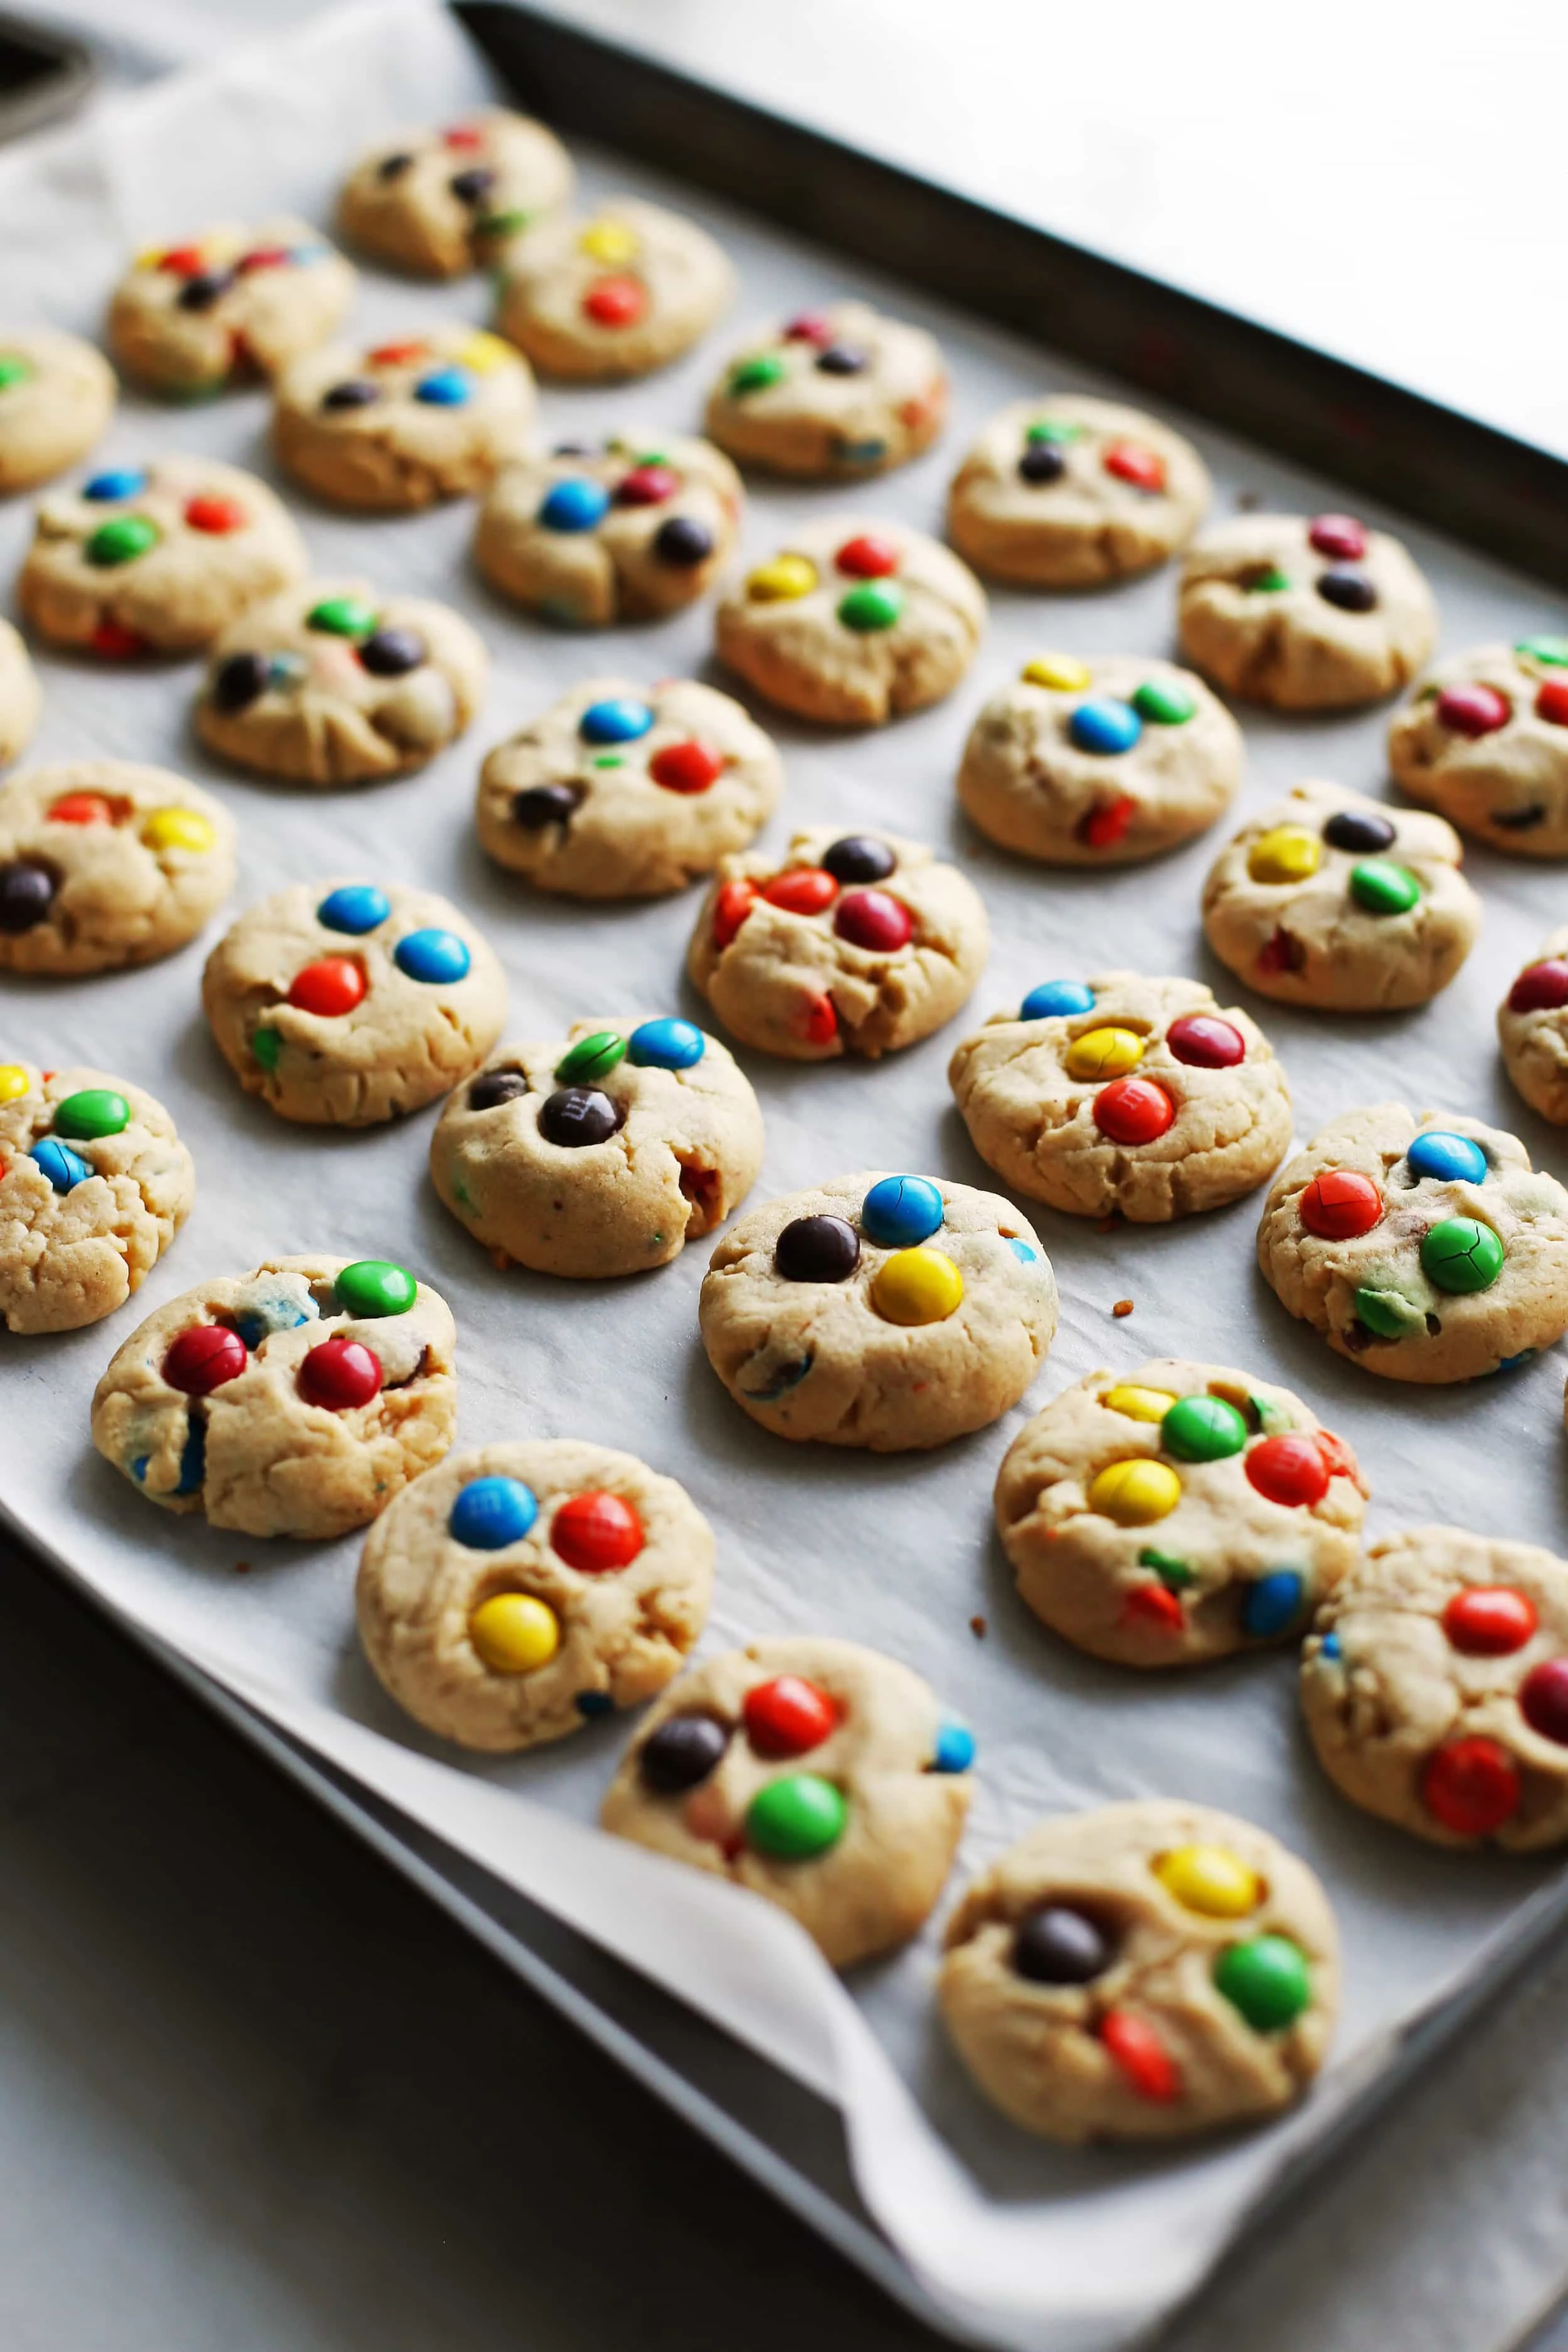 Side view of rows of baked Peanut Butter Cookies with Chocolate M&M's on a parchment paper-lined baking sheet.